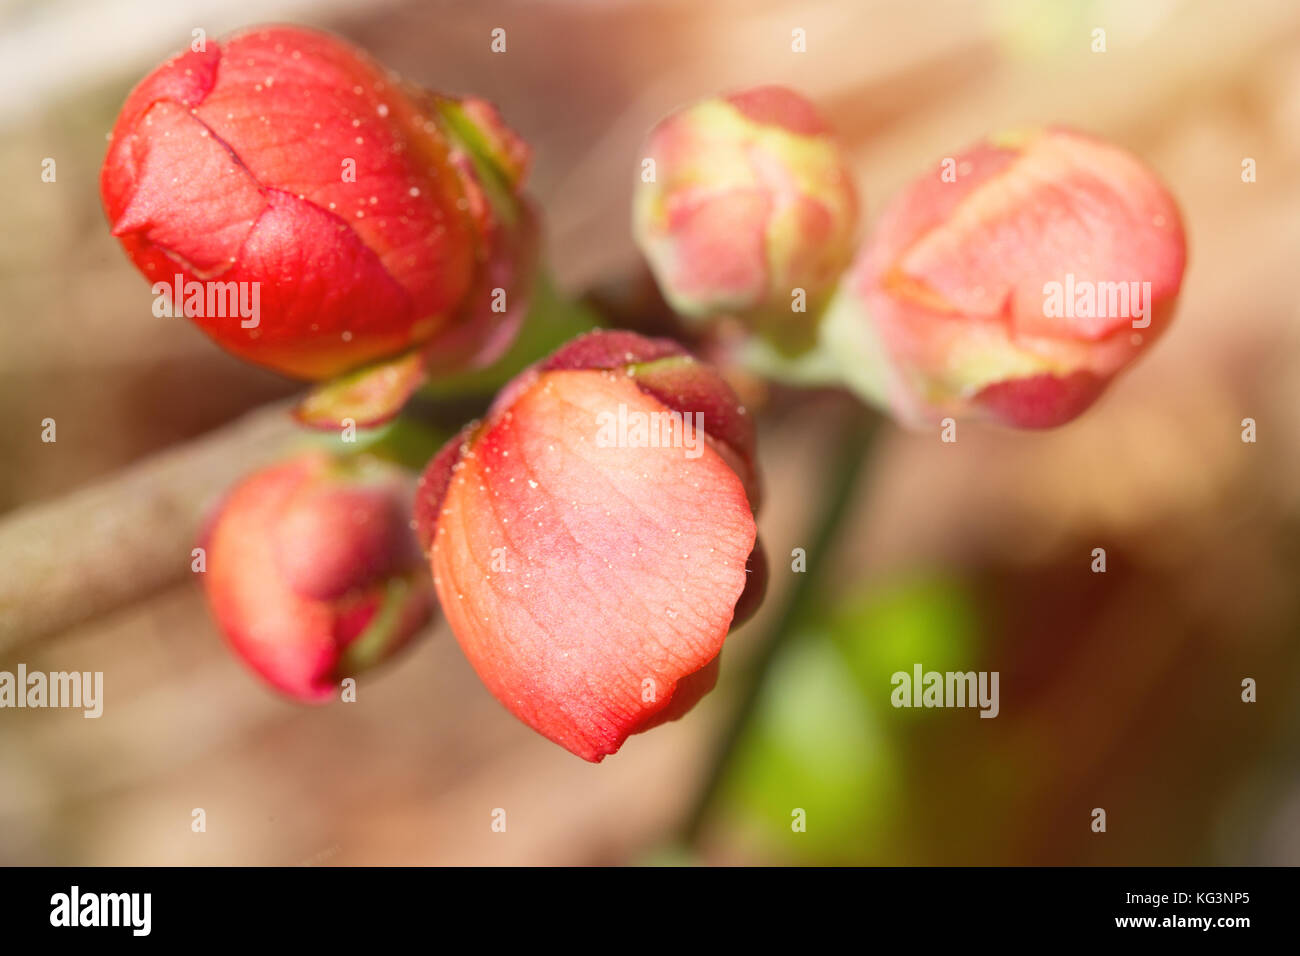 Bright pink buds of a quince close up. Macro, small depth of sharpness. Buds are lit with a sunlight on an indistinct light beige background. Stock Photo